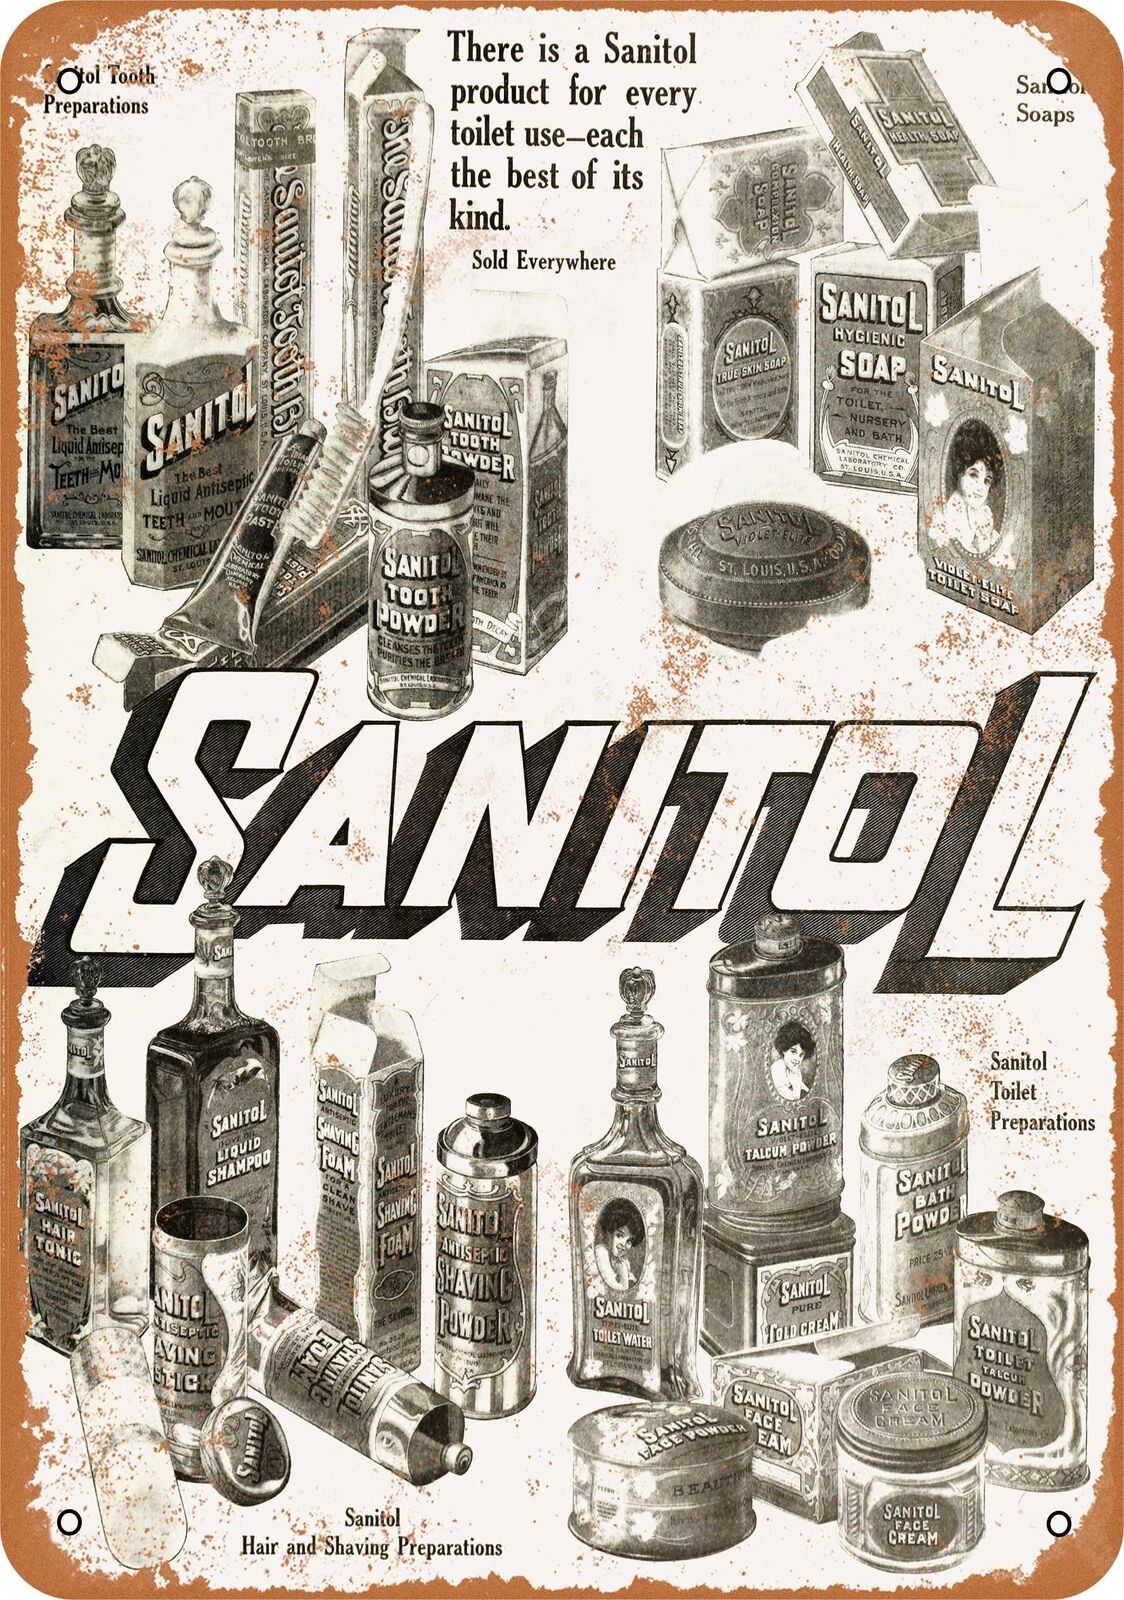 Metal Sign - 1910 Sanitol Toilet Products - Vintage Look Reproduction